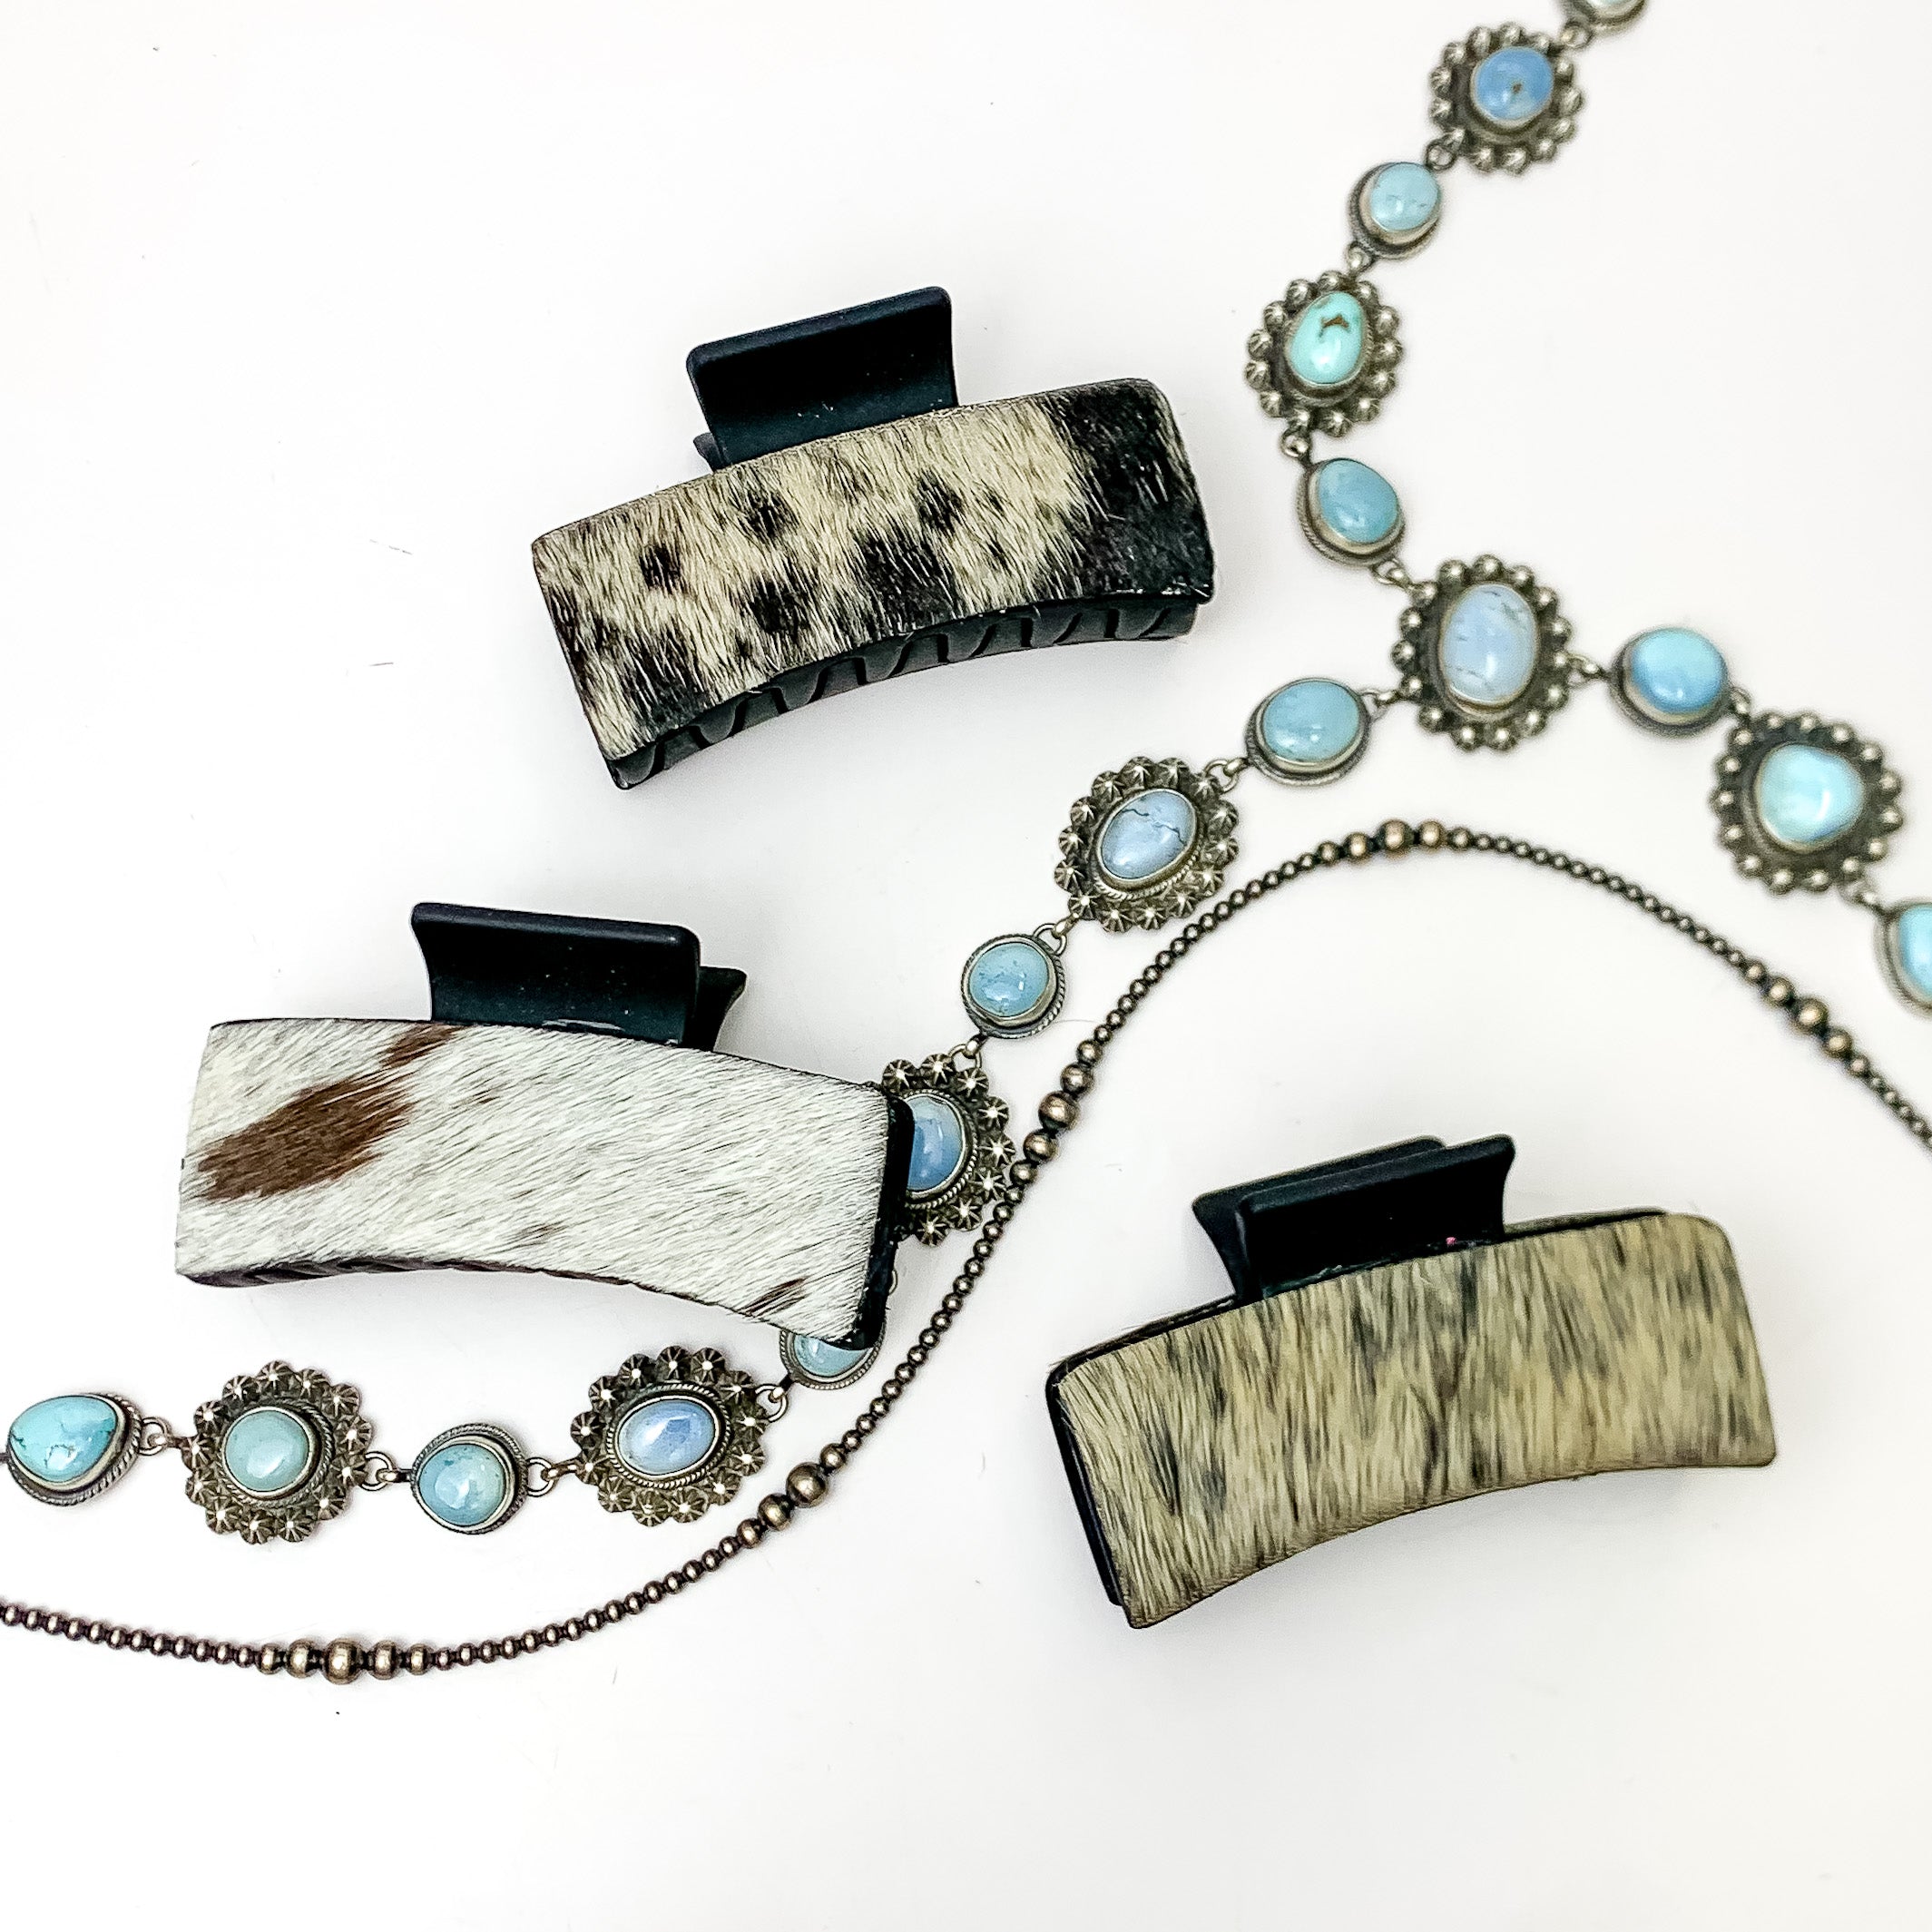 Pictured are three black hair clips with ivory and black mix hide patches. These earrings are pictured on a white background with silver necklaces under the clips. 